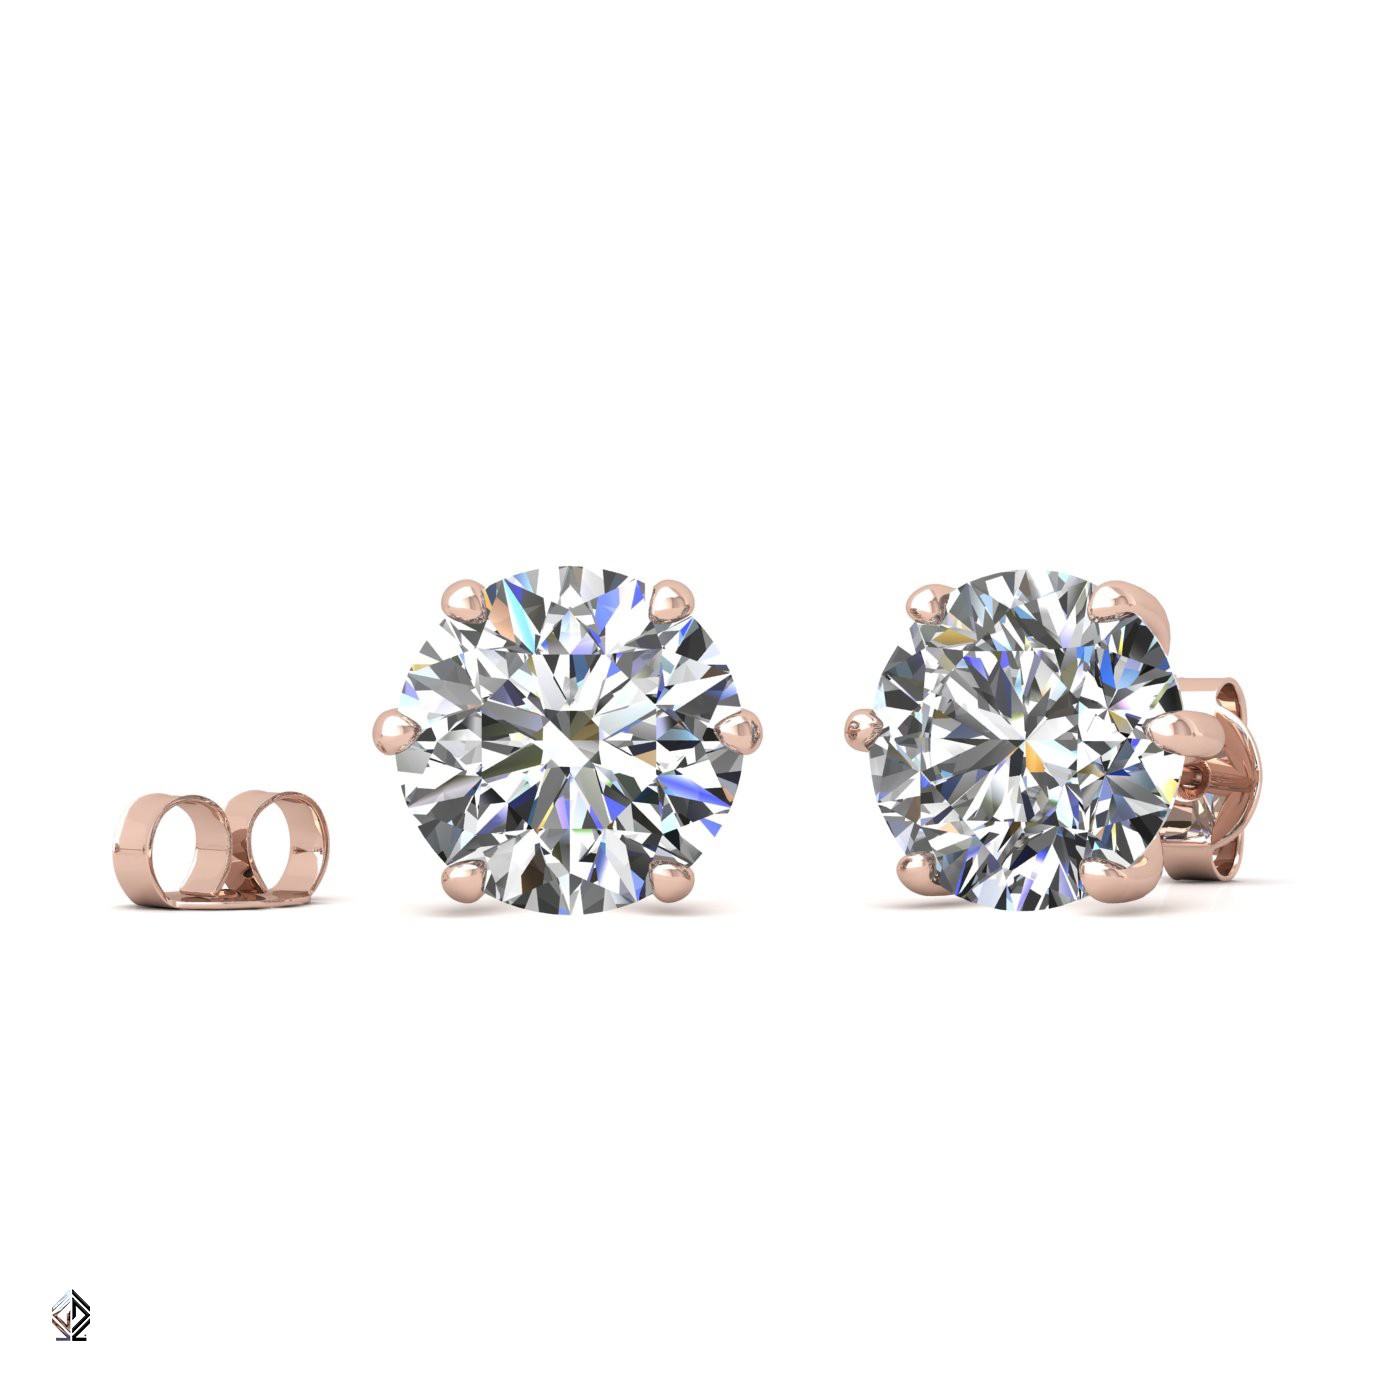 18k rose gold 0,7 ct each (1,4 tcw) 6 prongs round shape diamond earrings Photos & images